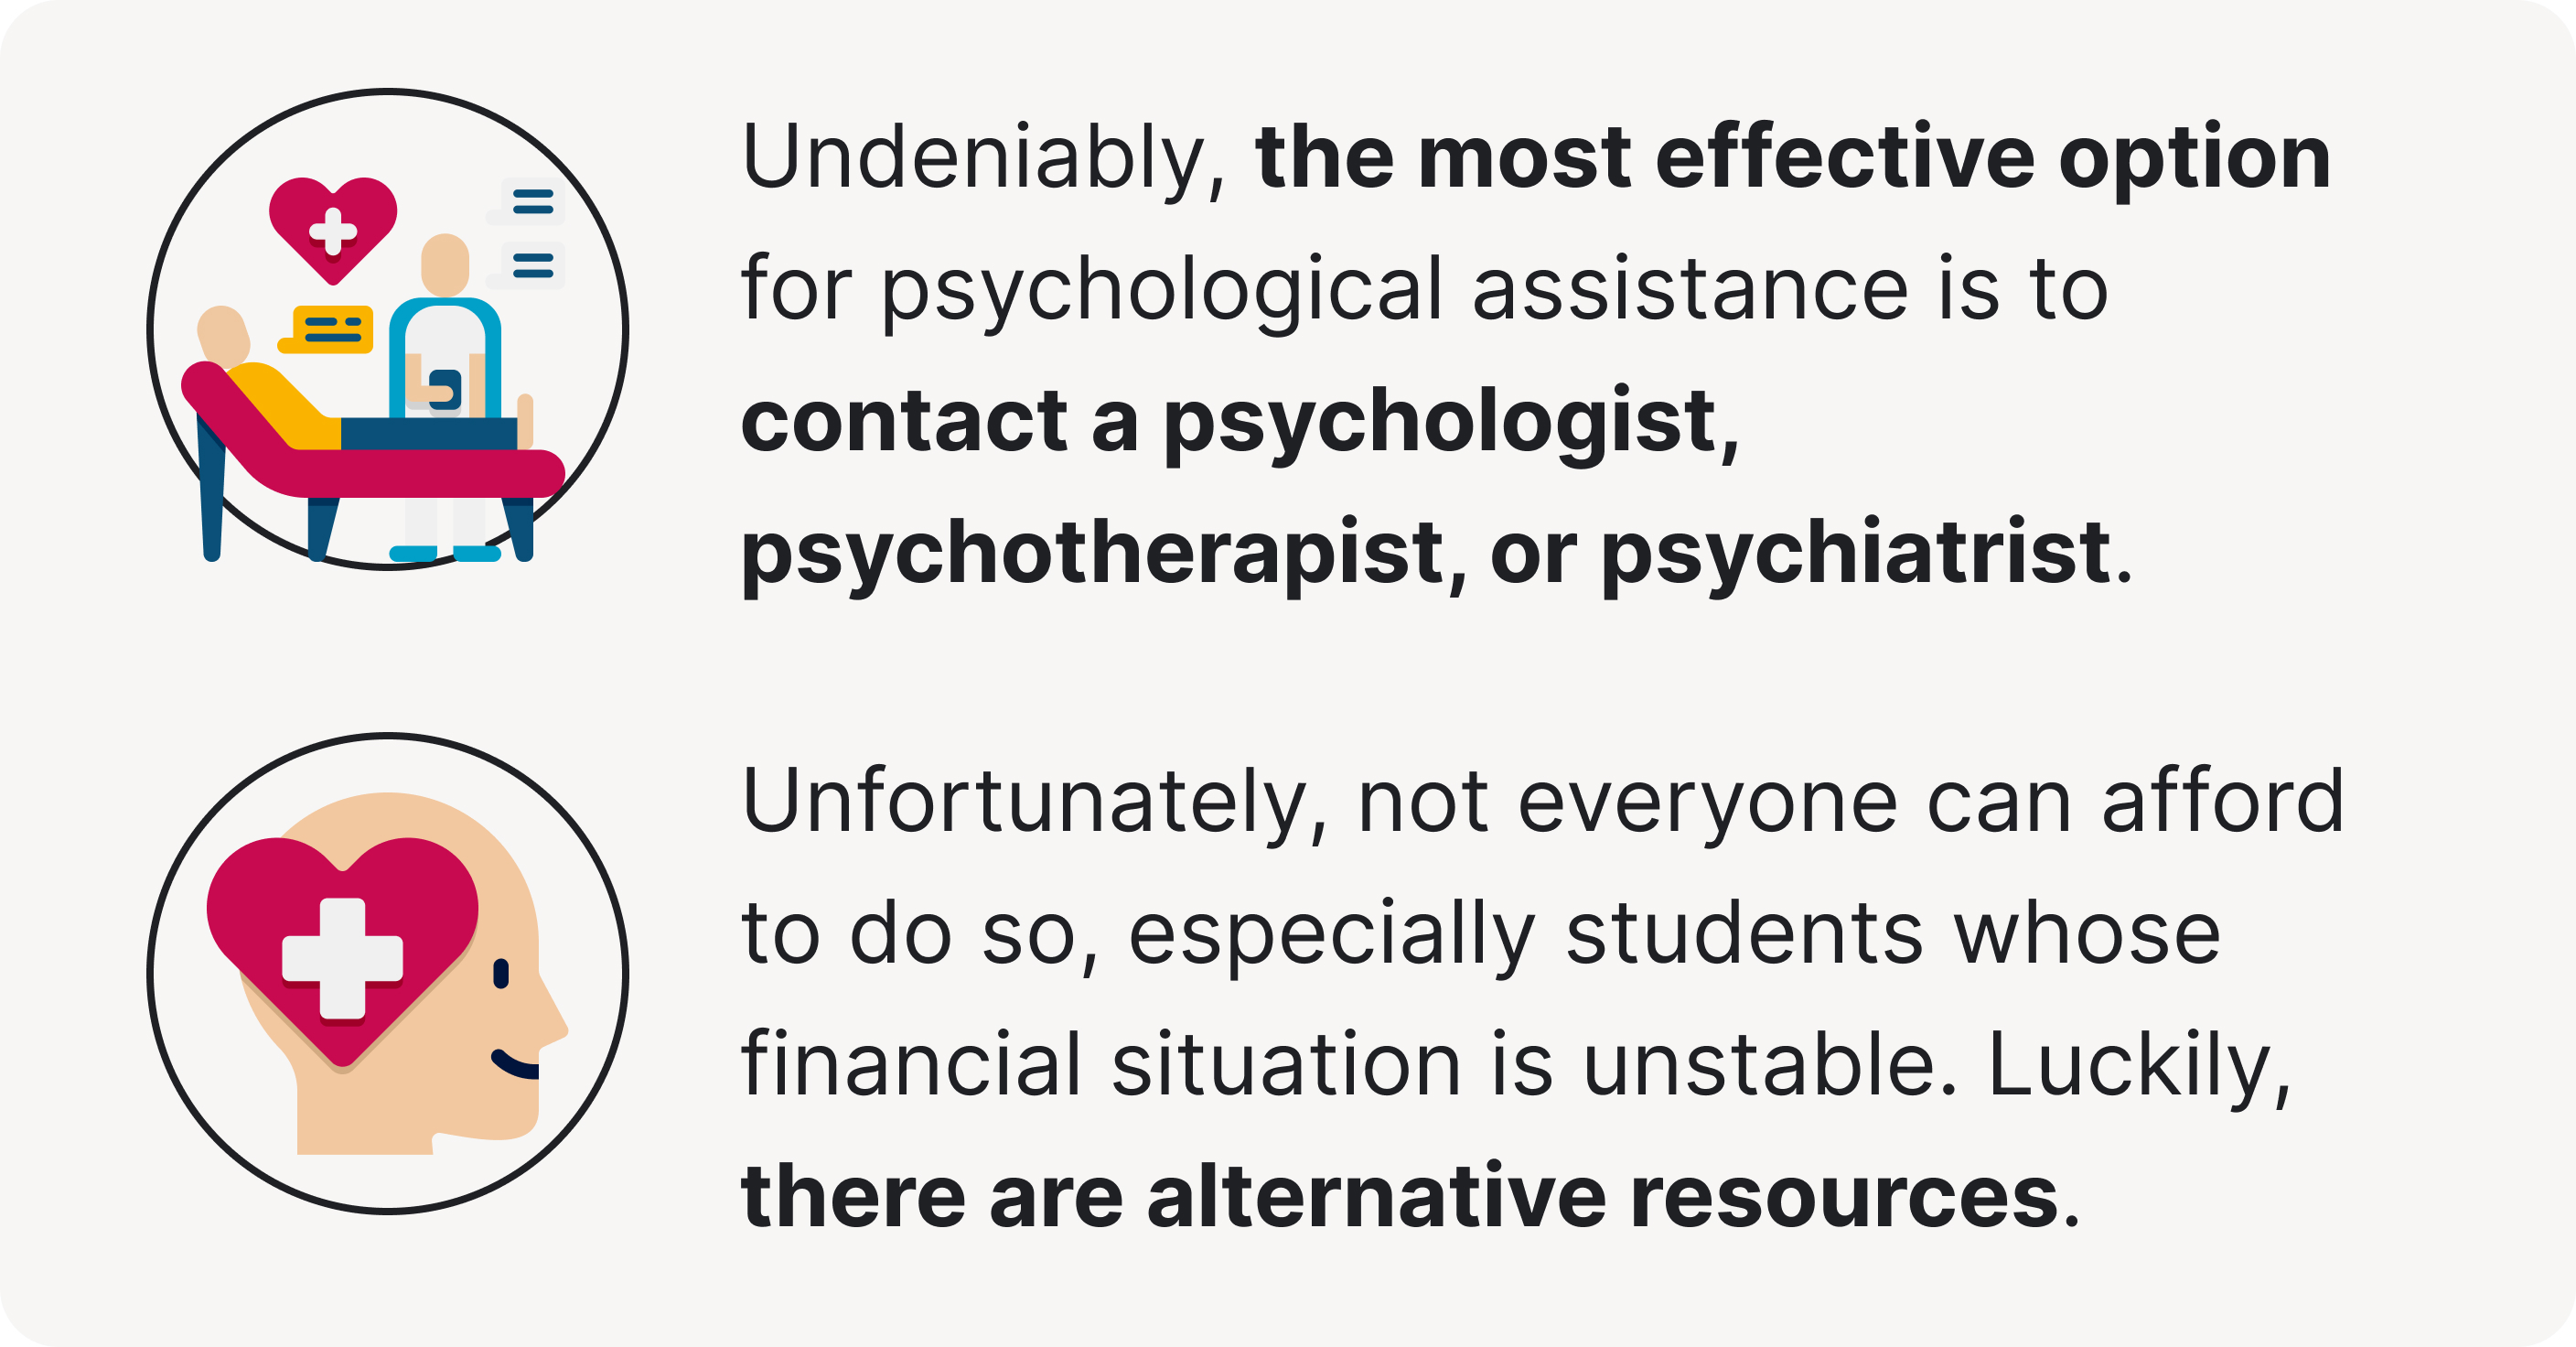 In case of mental health issues, it's better to contact a professional.